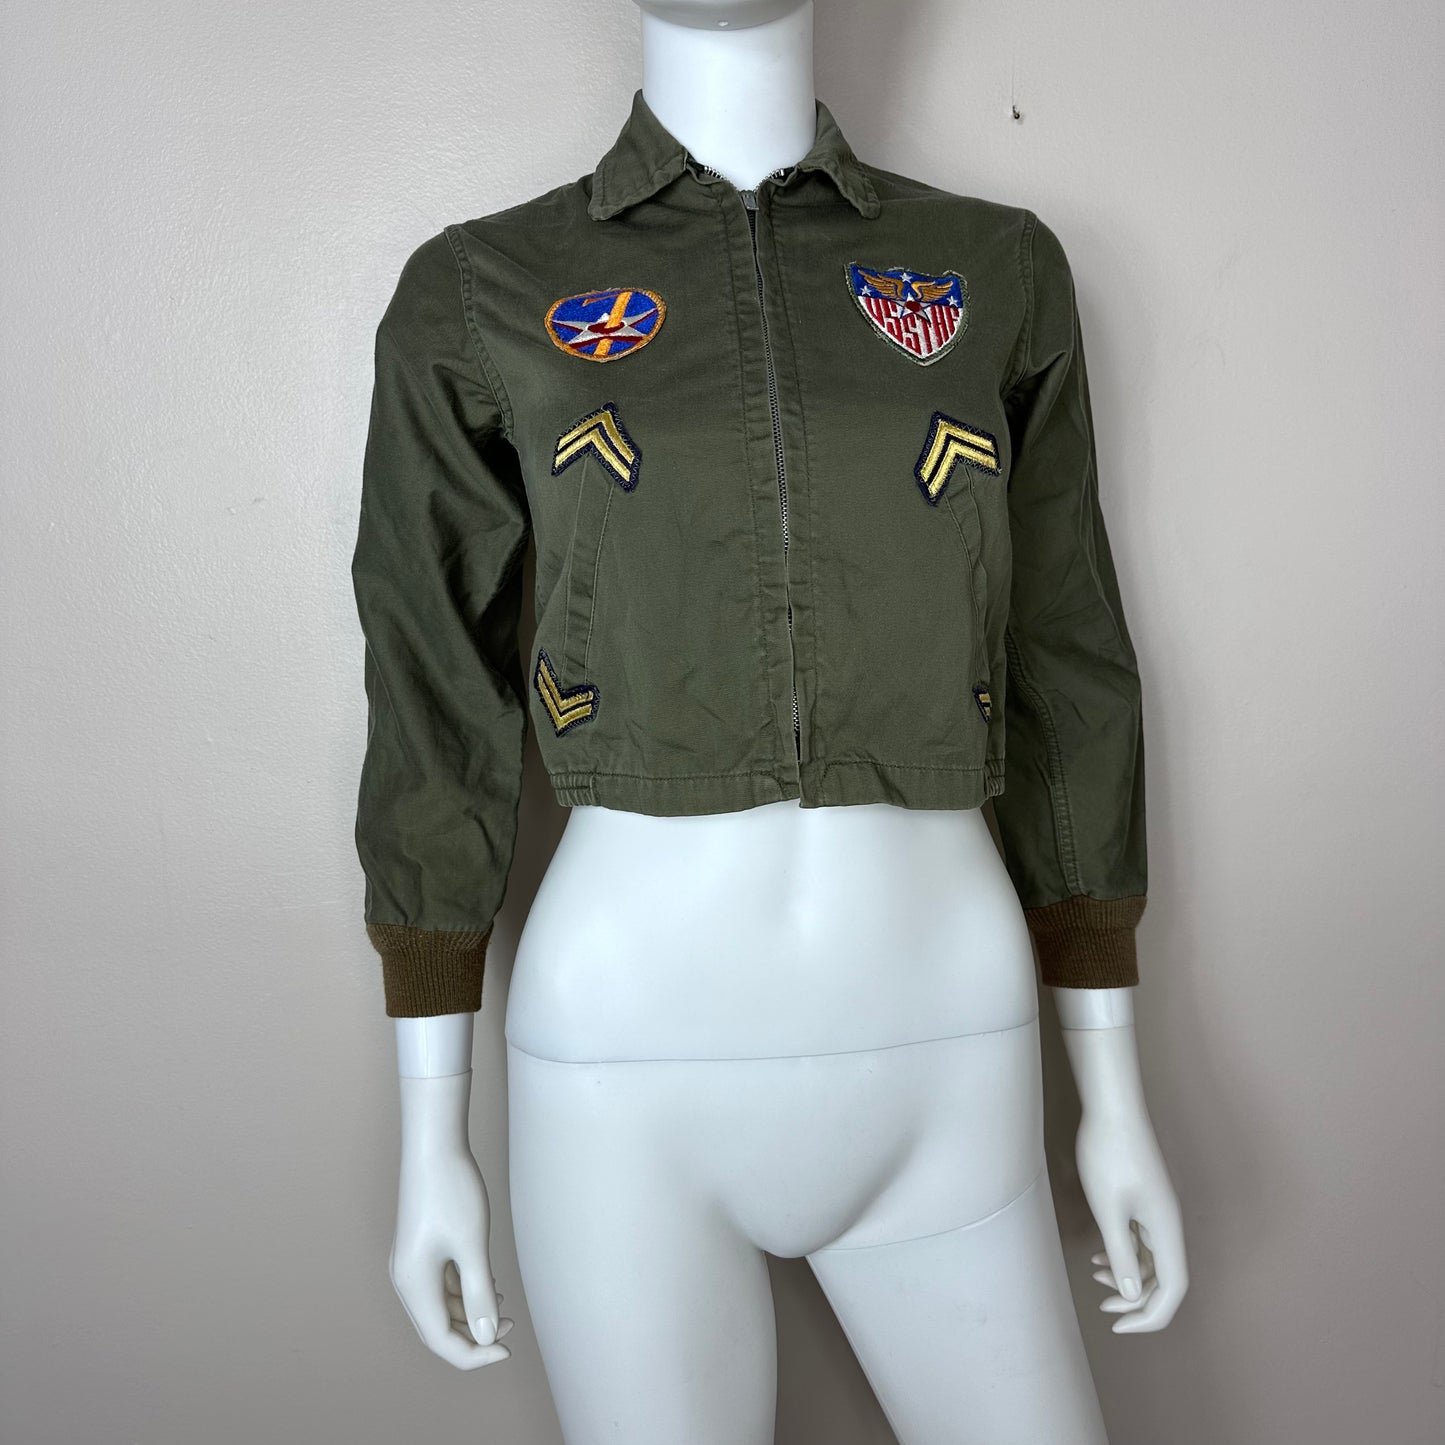 1960s Kids Combat Jacket by Harle with WW2 Patches, Size 8/10